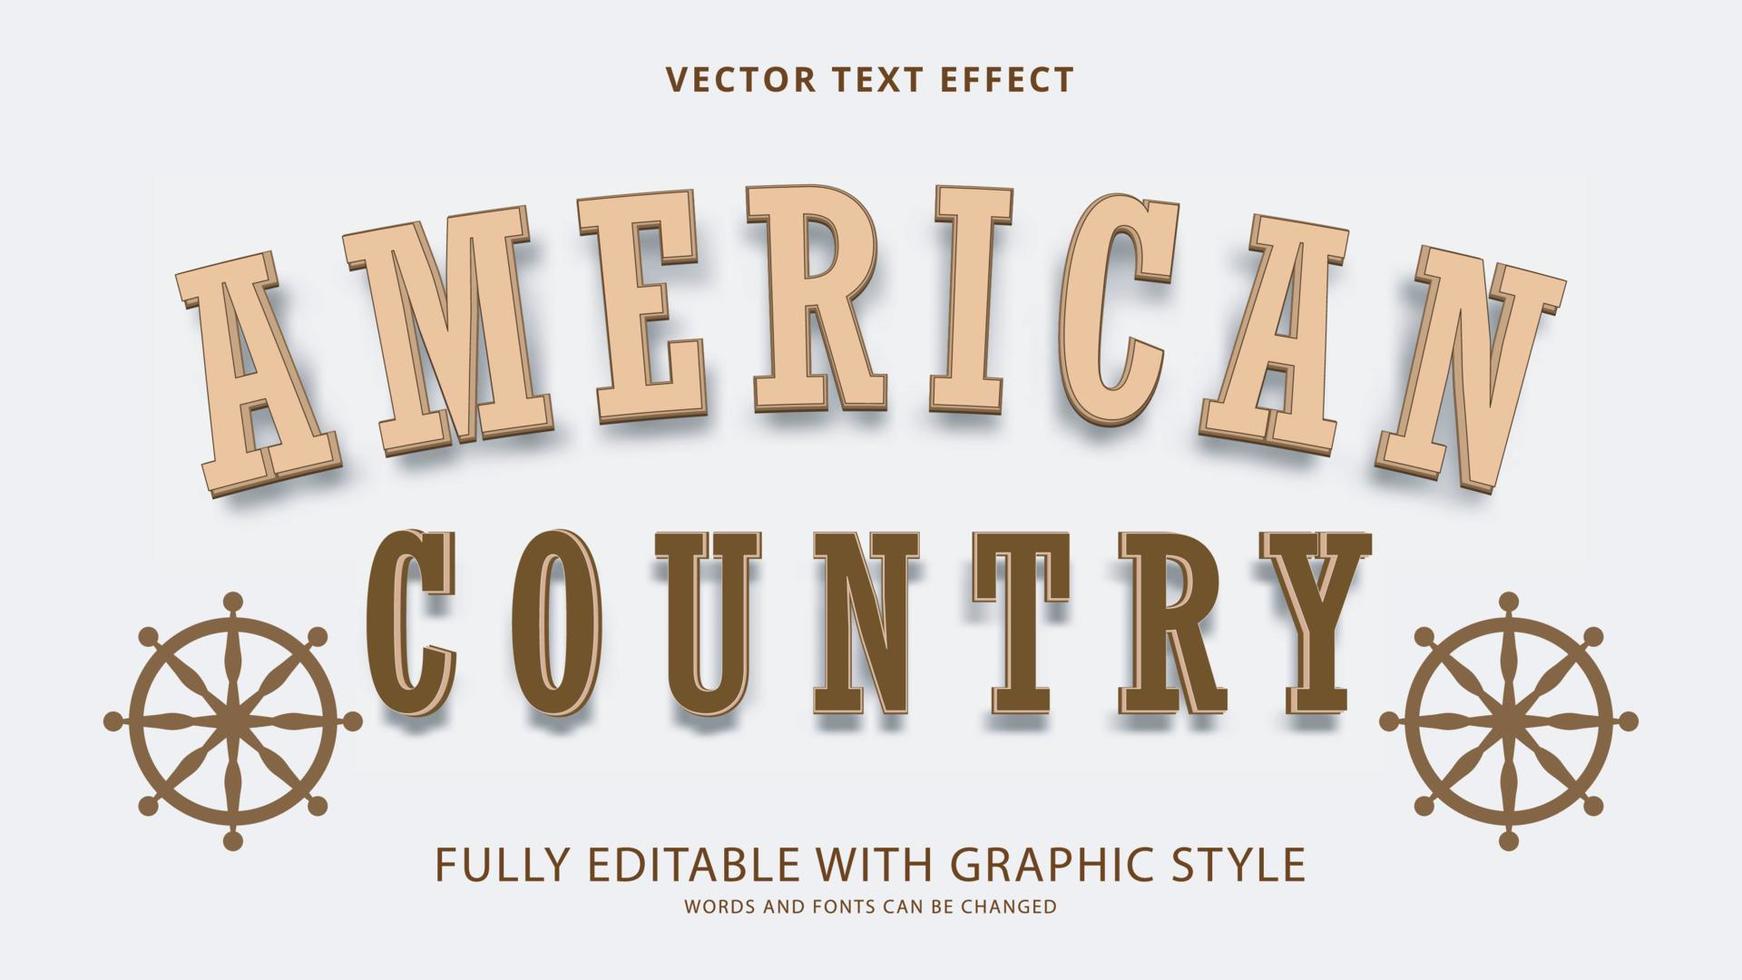 american country text effect editable with graphic style vector